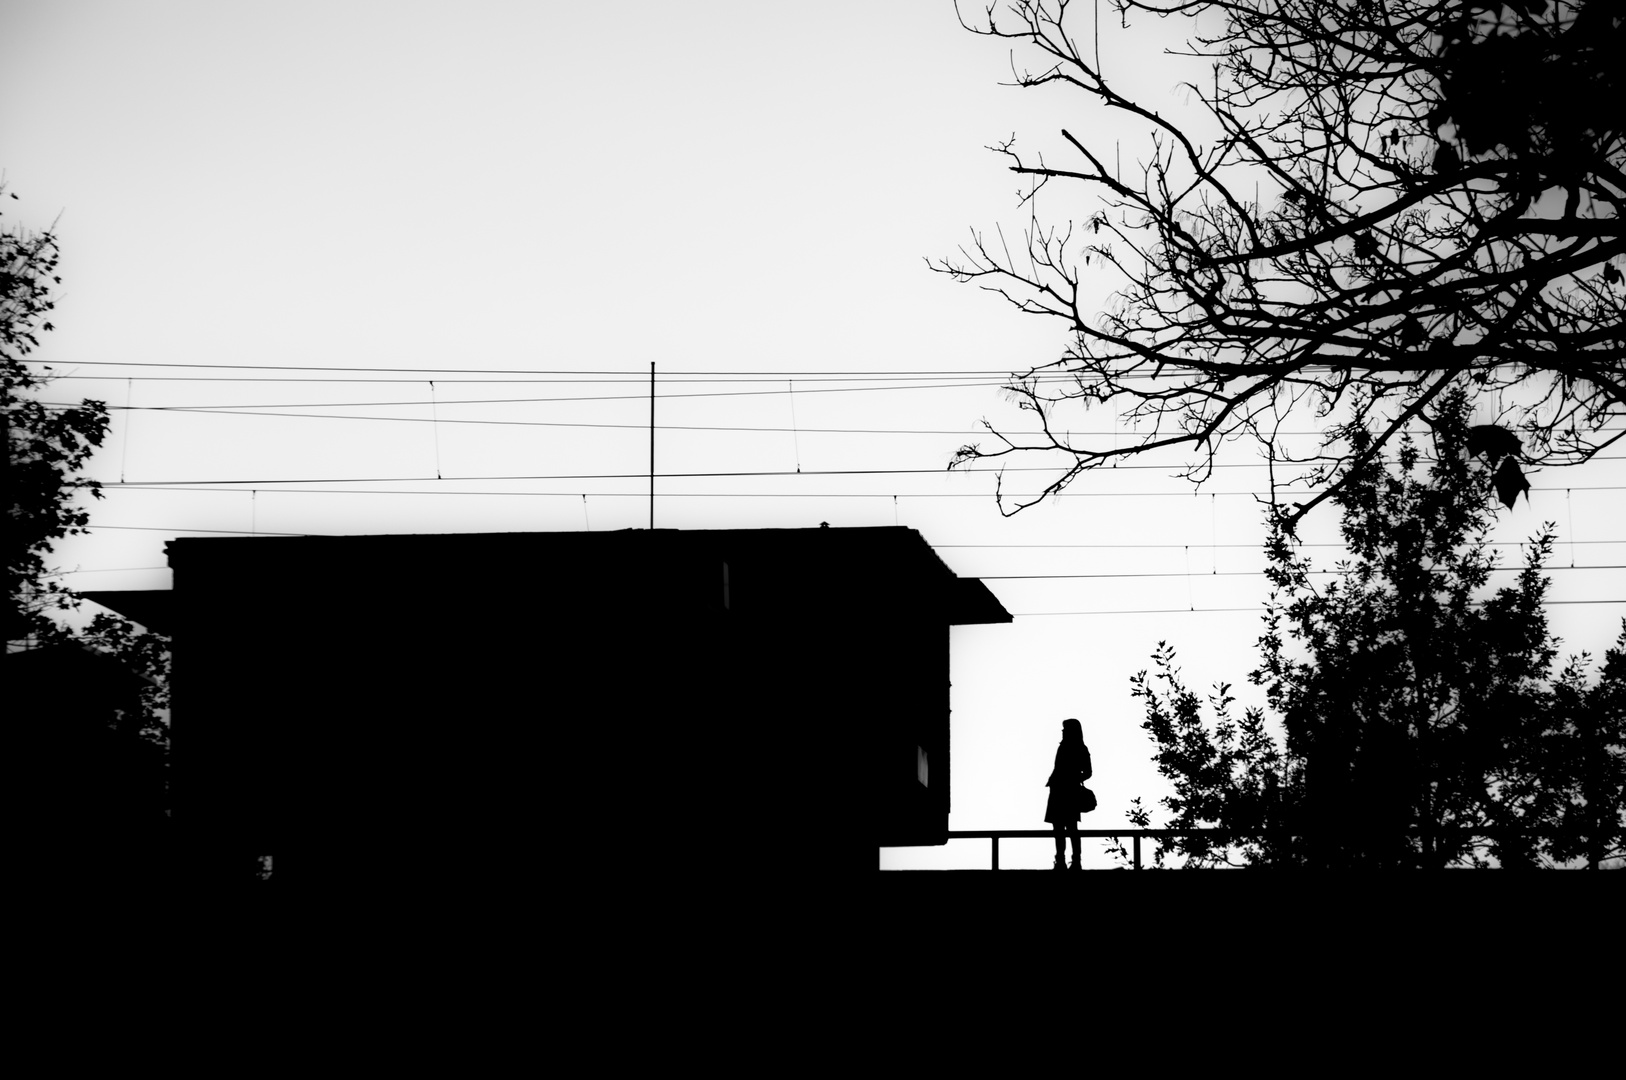 a woman waiting for the train